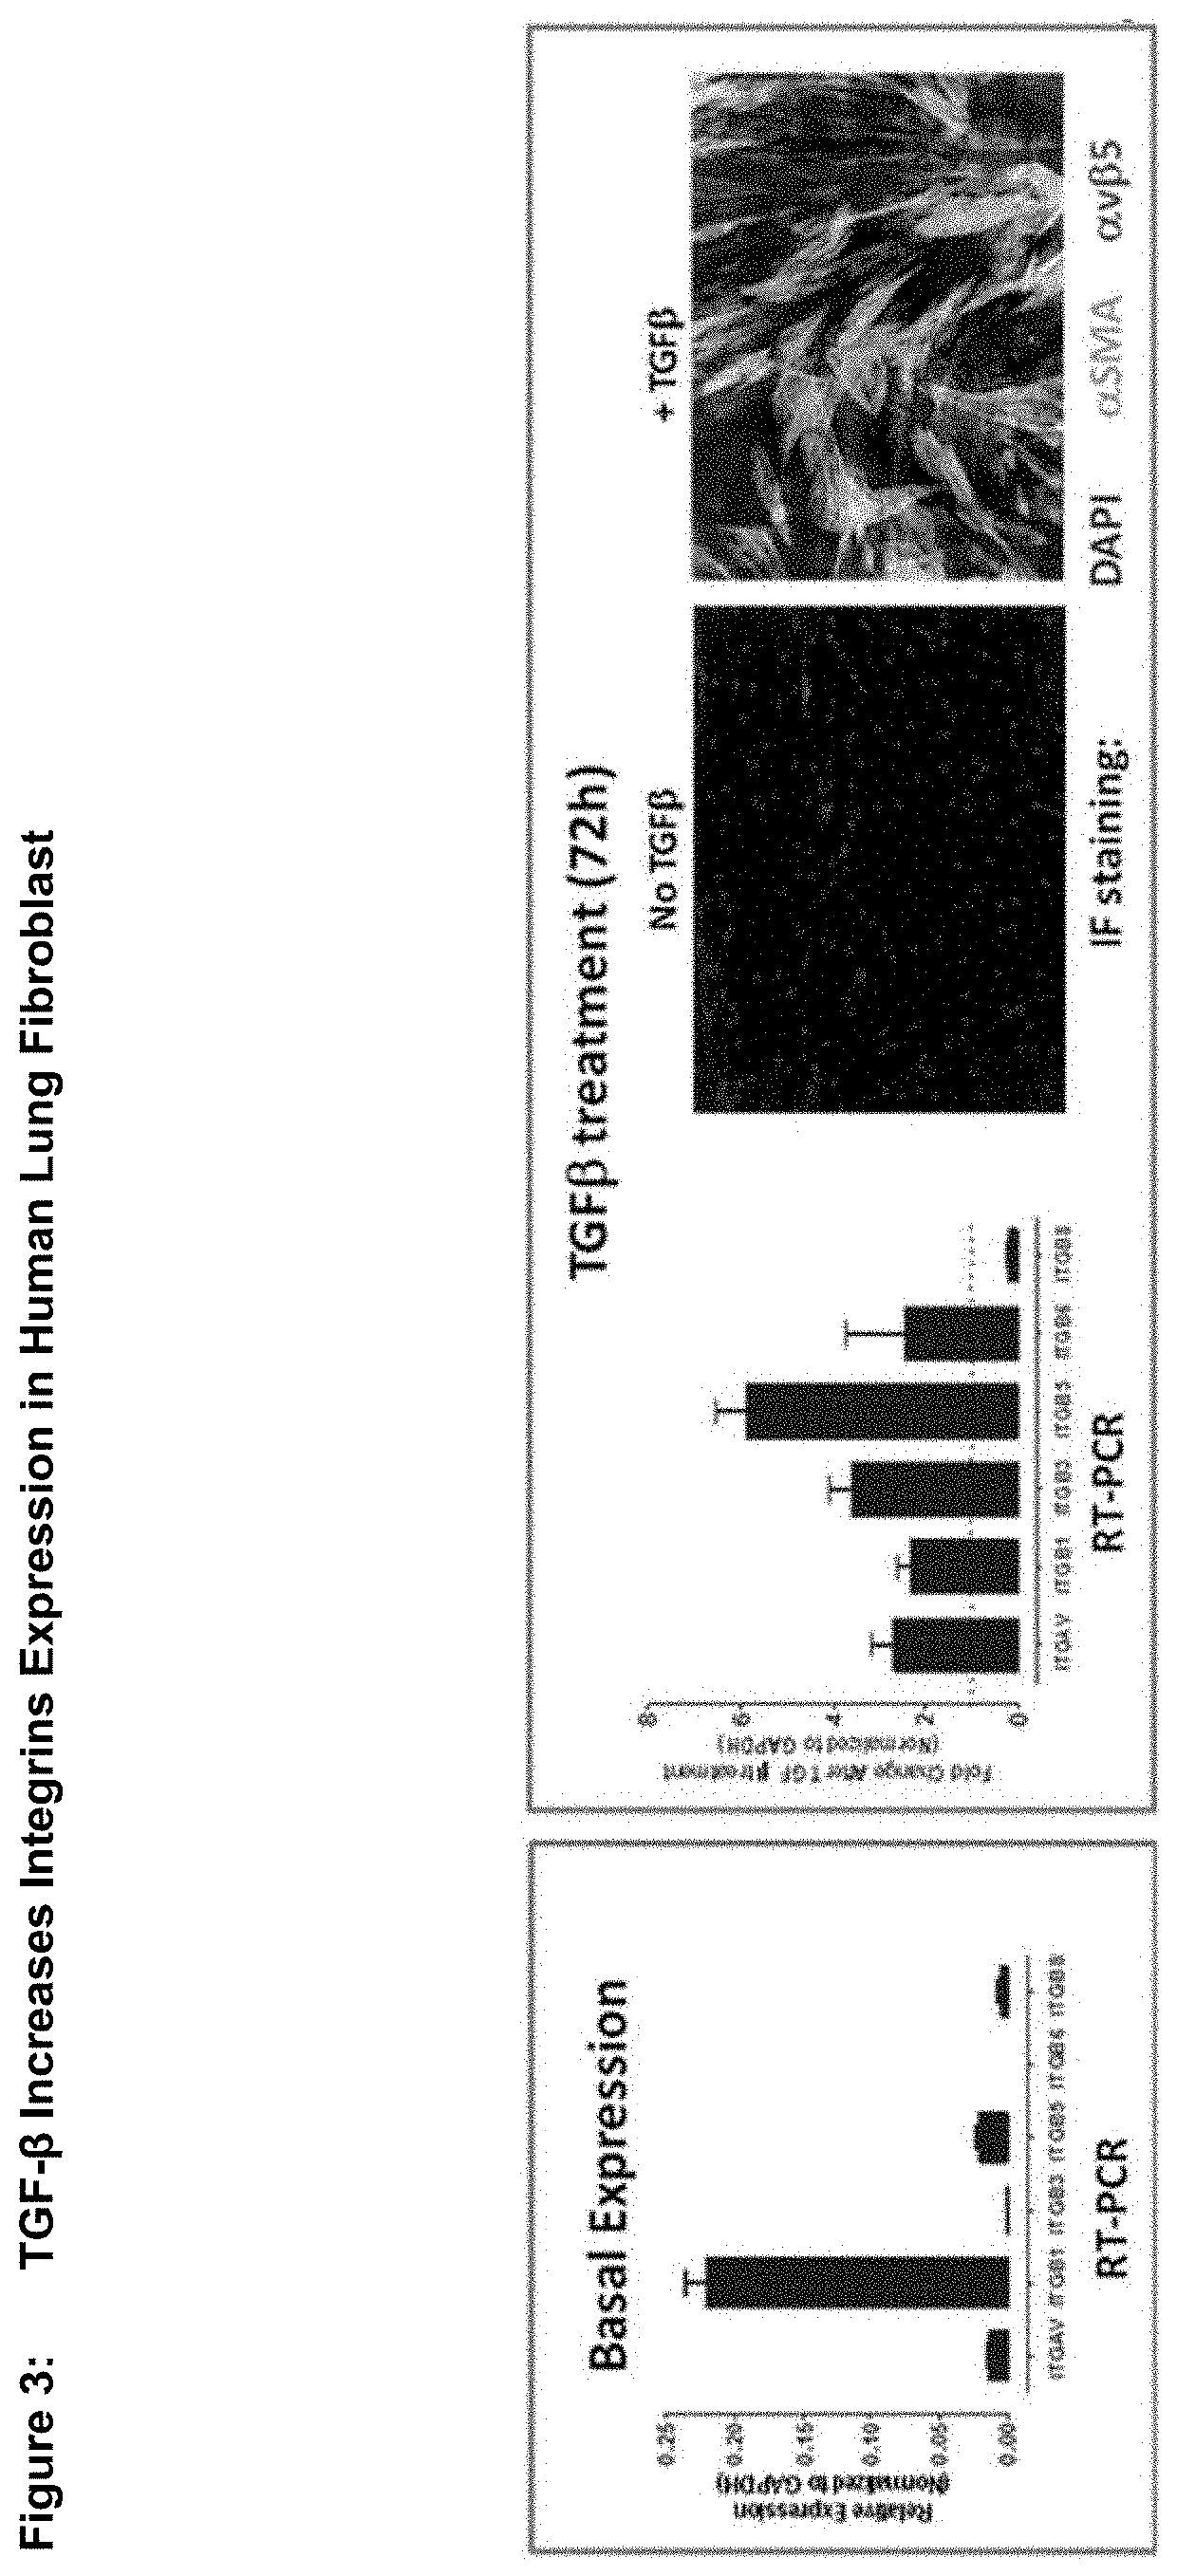 Anti-alpha-v integrin antibody for the treatment of fibrosis and/or fibrotic disorders